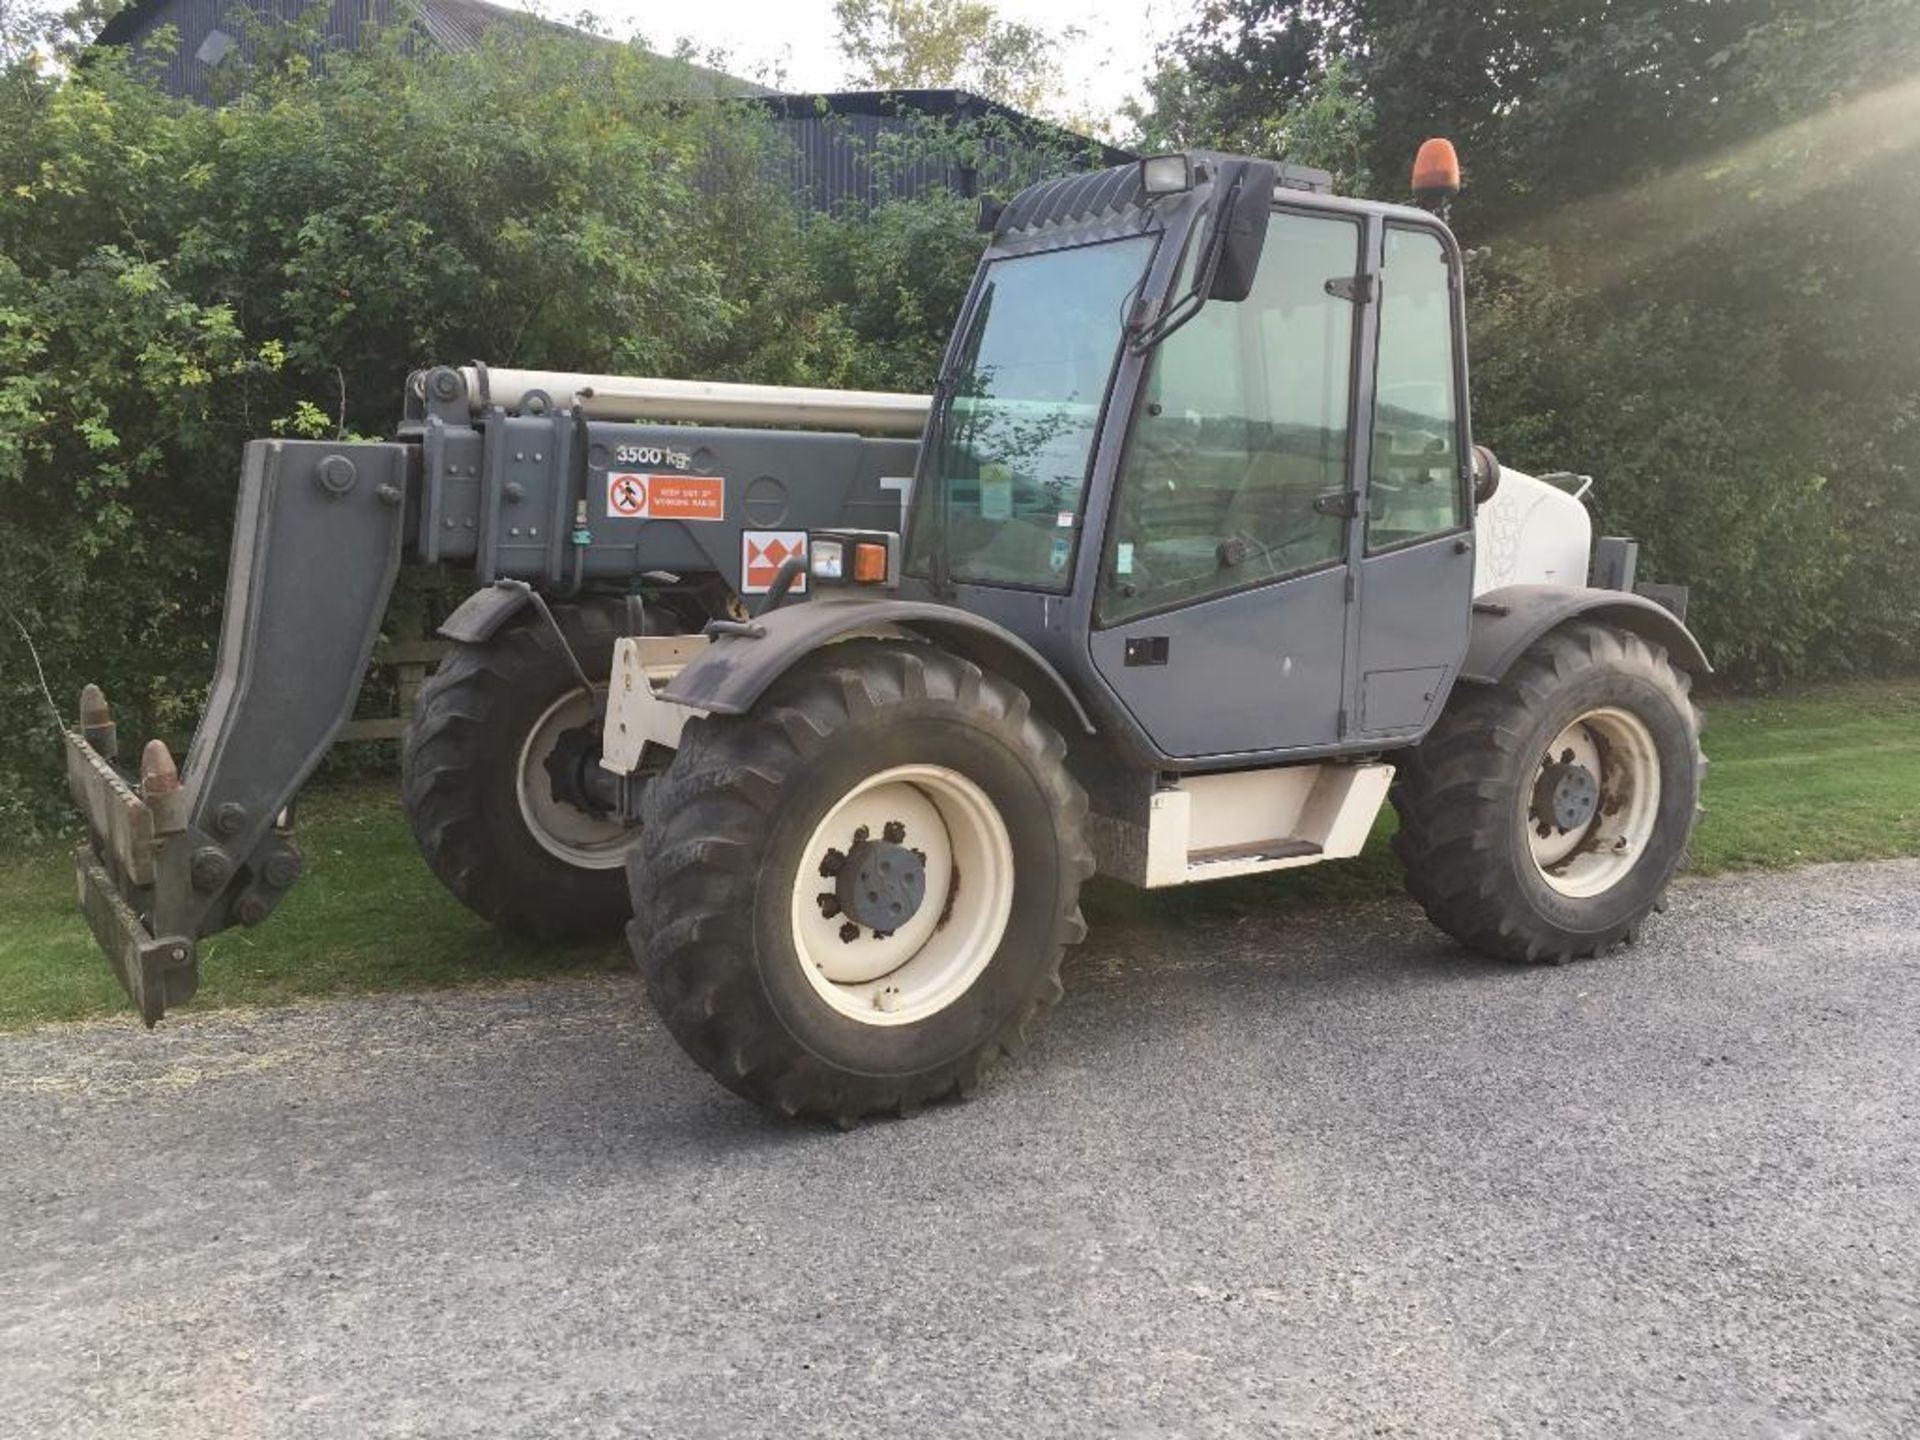 2000 Terex Agri lift 359 materials handler with pin and cone headstock, rear pick up hitch on 15.5/8 - Image 4 of 7